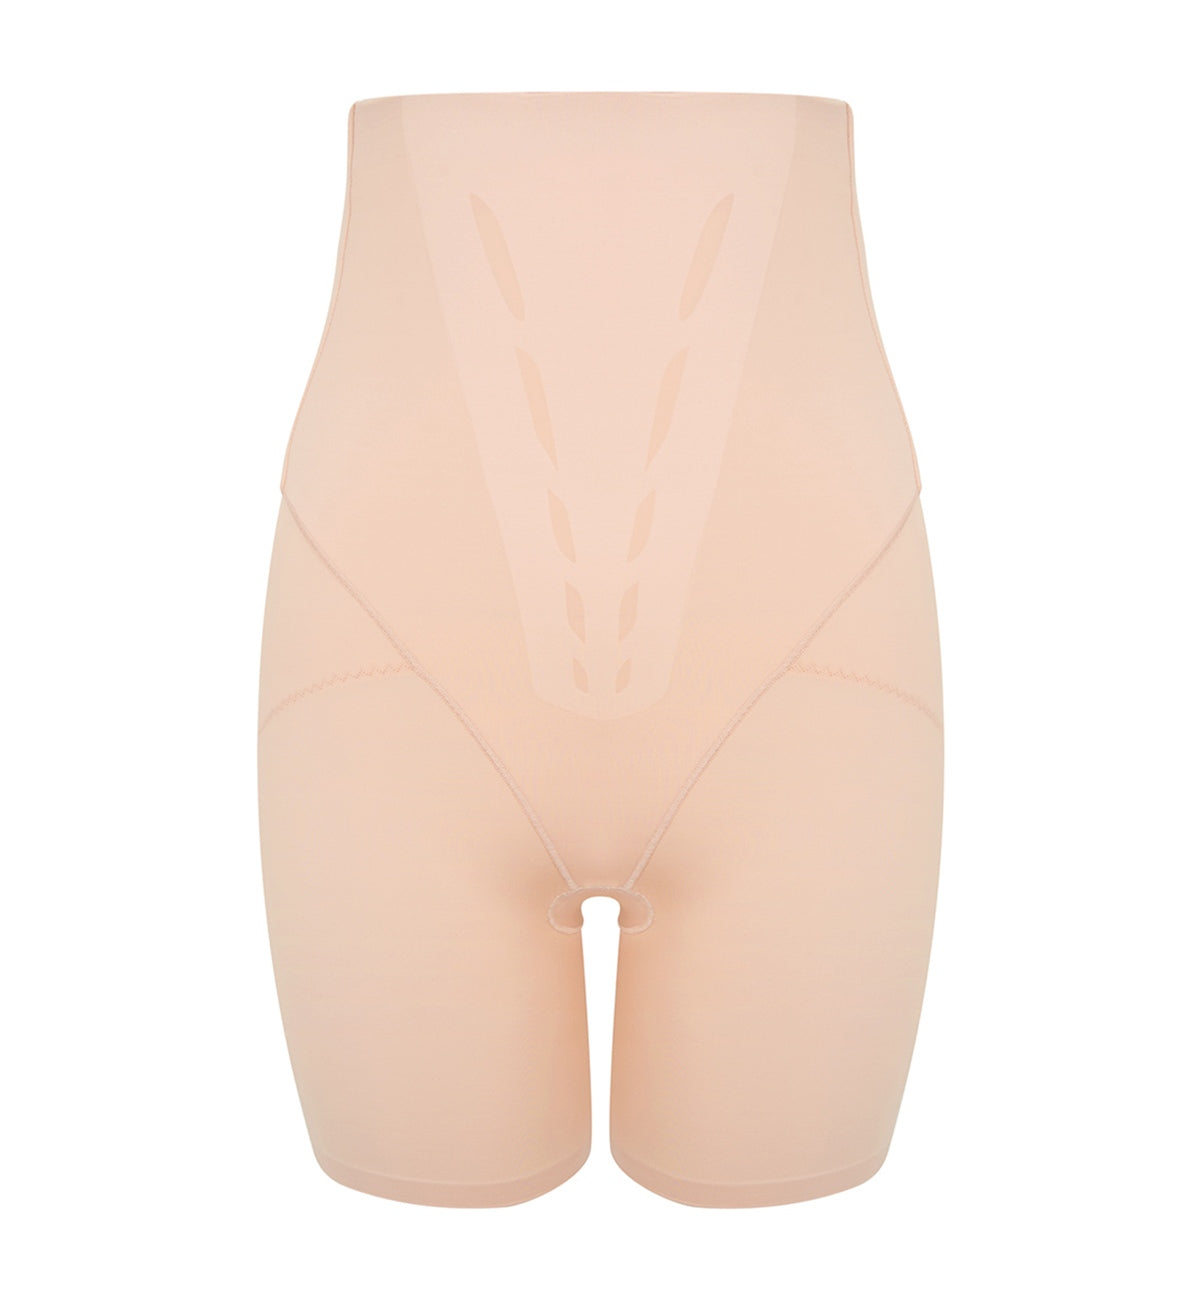 Triumph Polyester Shapewear for Women for sale